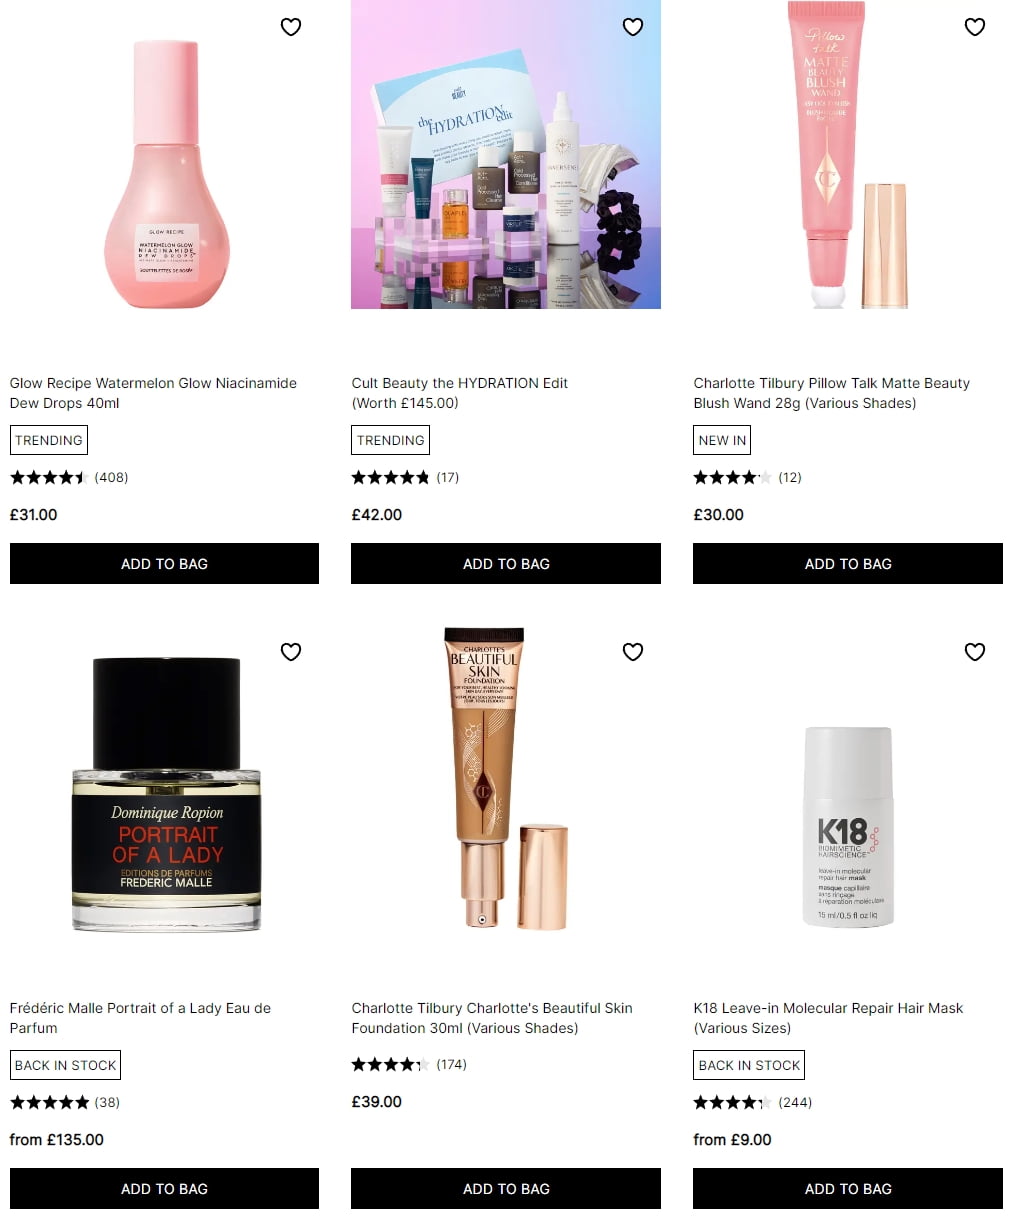 Double status points at Cult Beauty